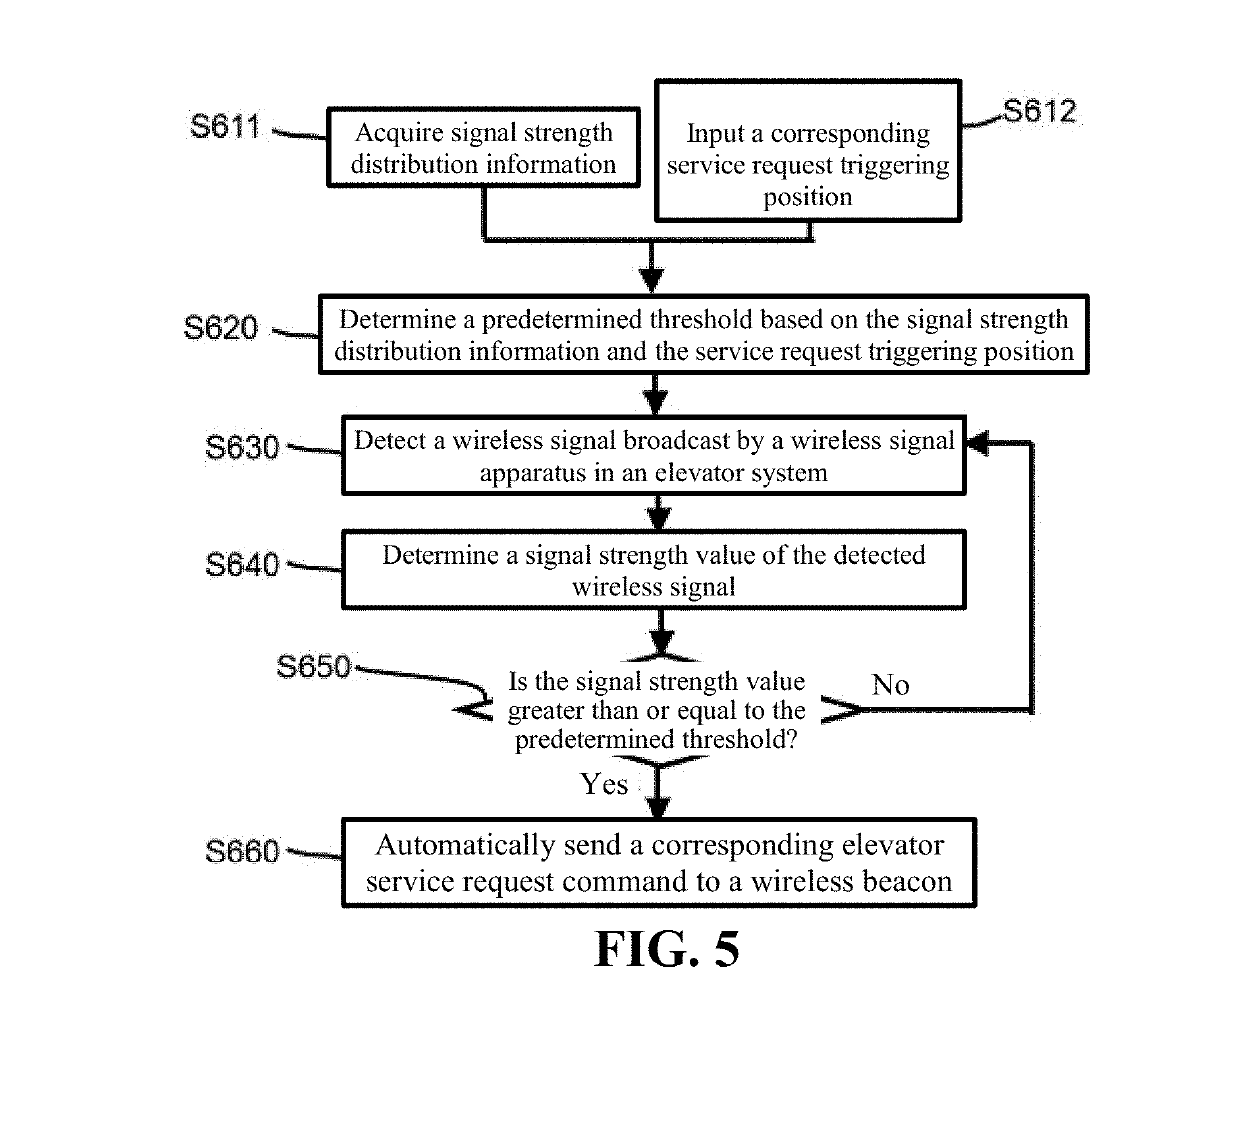 Personal mobile terminal and a method of requesting elevator service